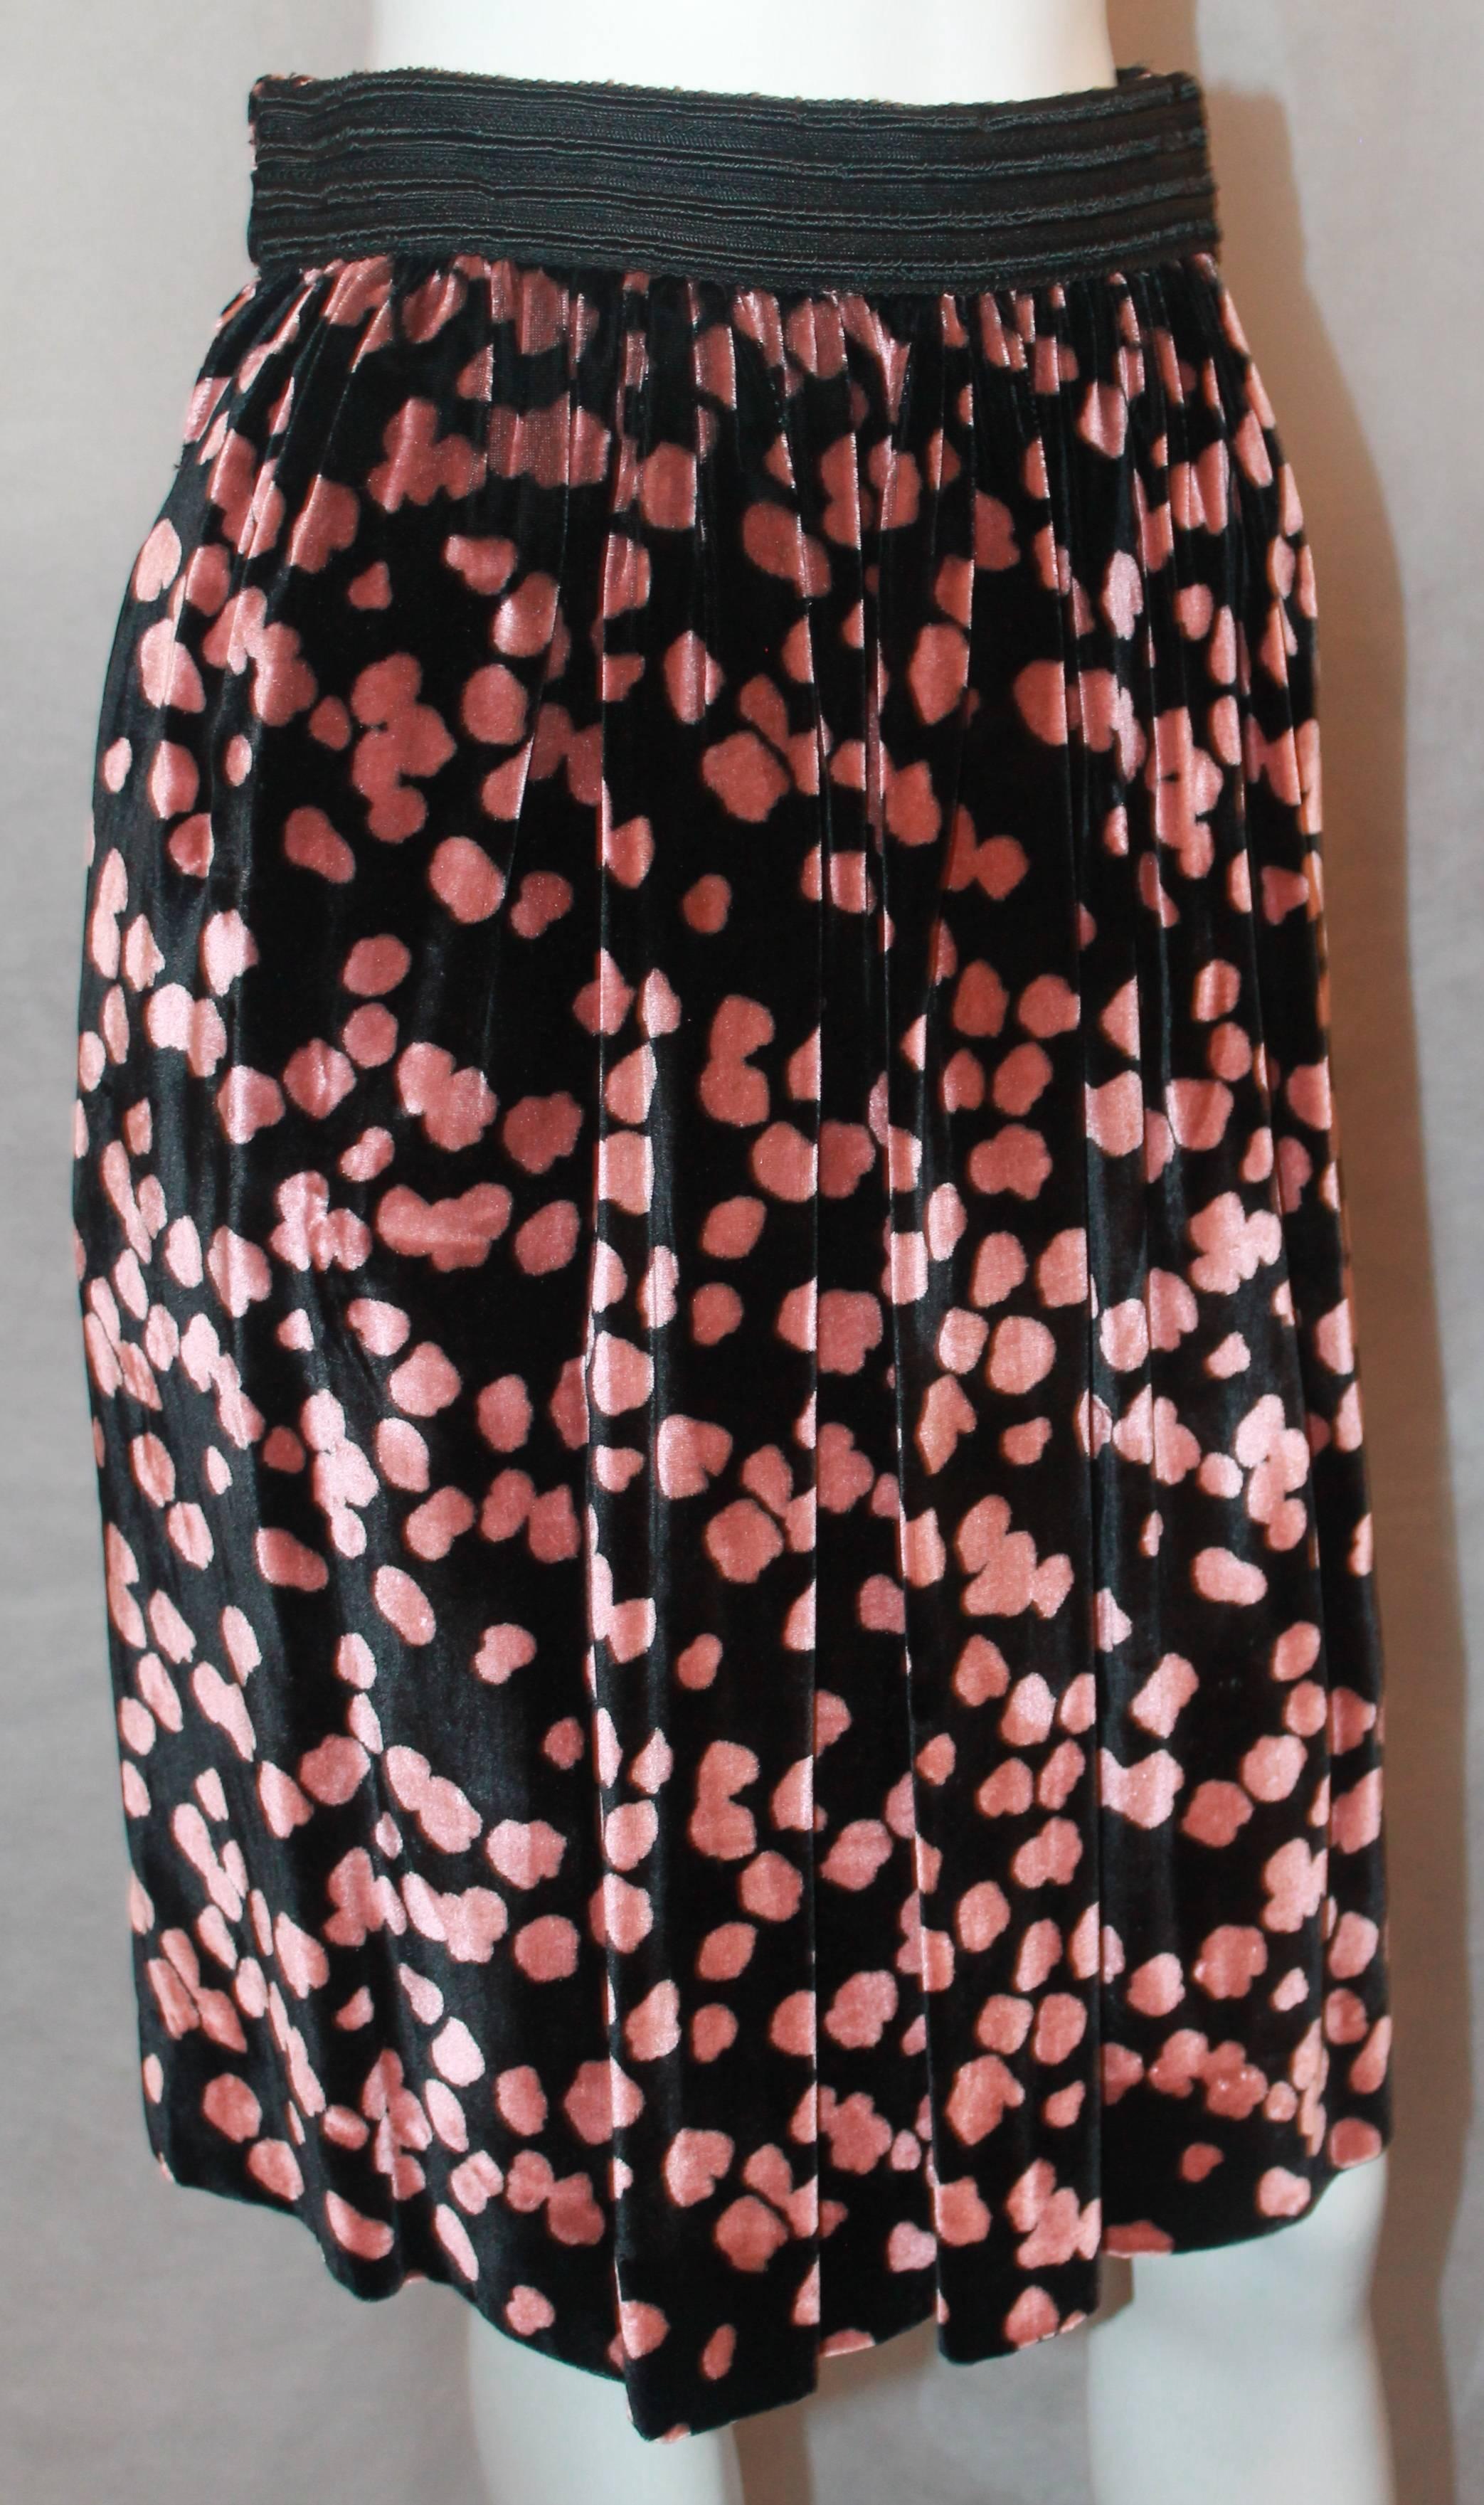 Galliano Vintage Black Velvet Skirt w/ Pink Spots - S - 1990's.  This adorable skirt is in excellent condition.  It features a lovely black velvet material with pink spots, silk lining, a black ribbon waistband in the front, a side pocket on the